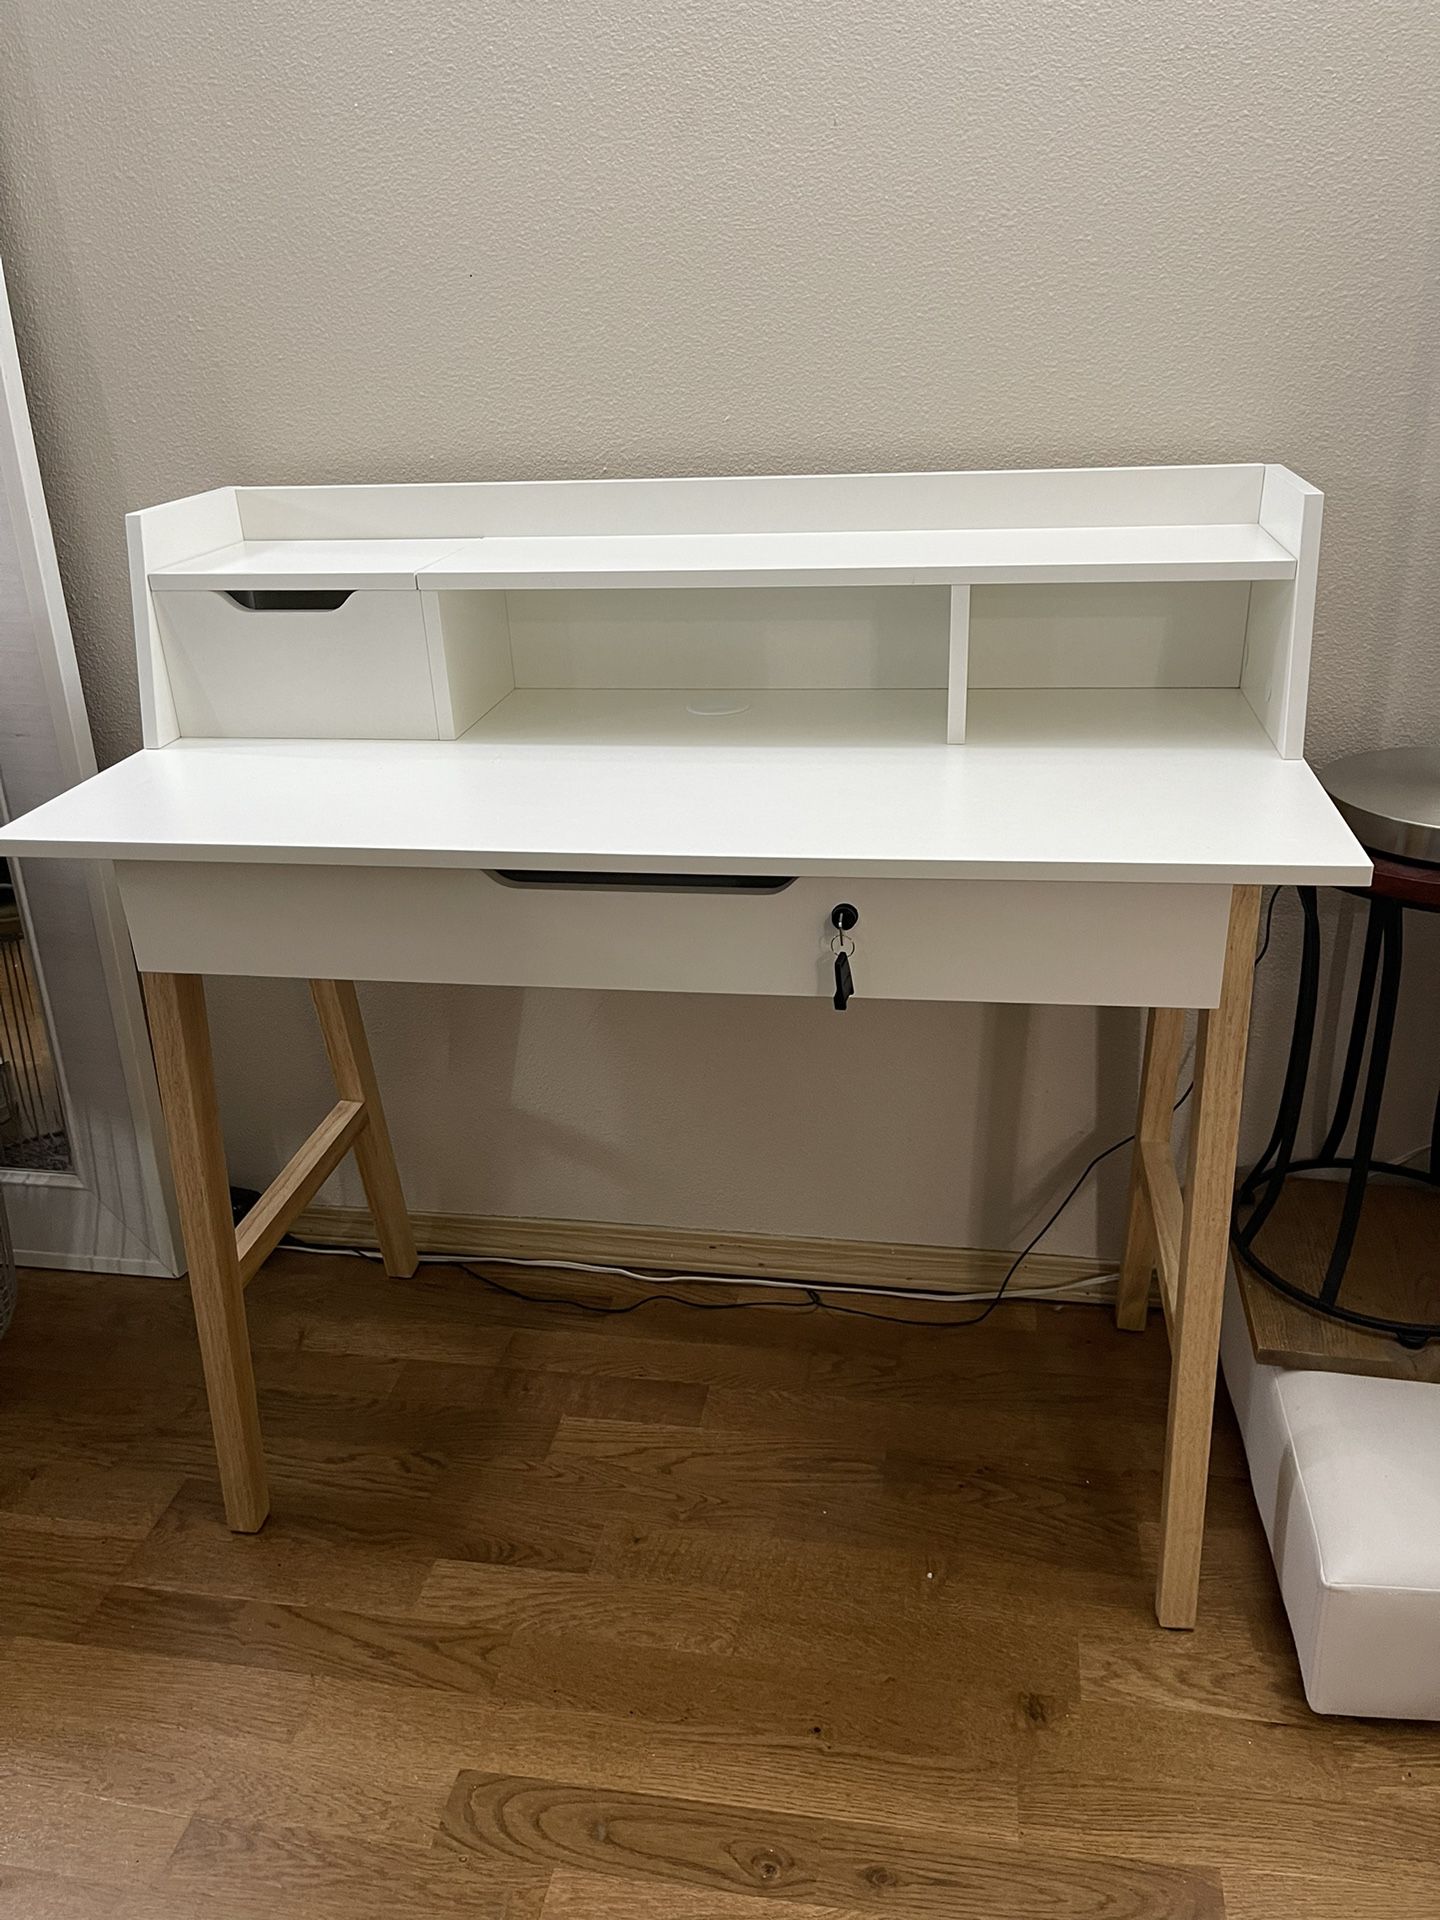 *NEW* Very Study Small White Desk/ Table/ Vanity